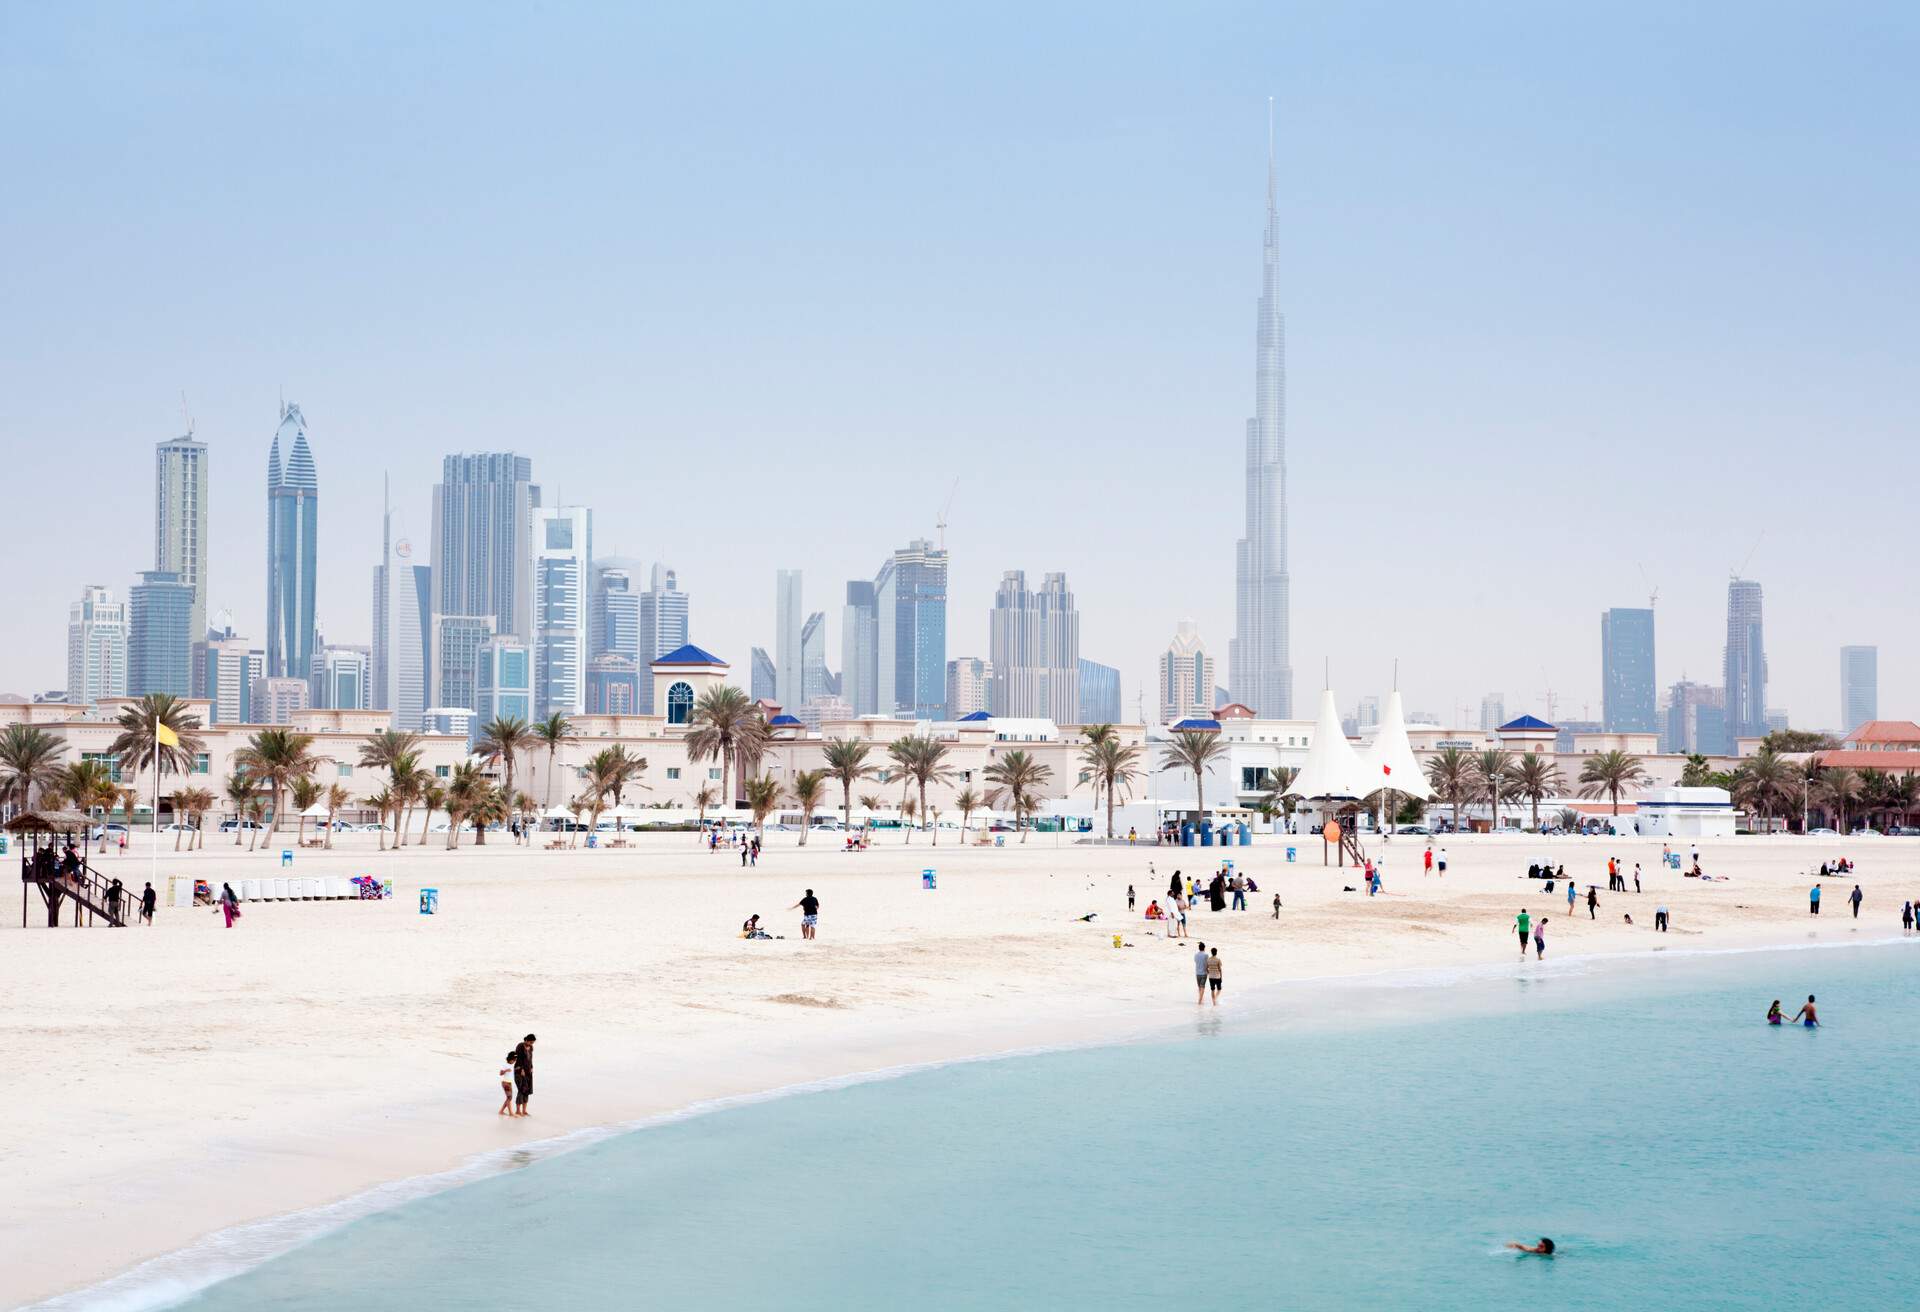 The crowded Jumeirah Beach backed by Dubai's distinctive architecture.